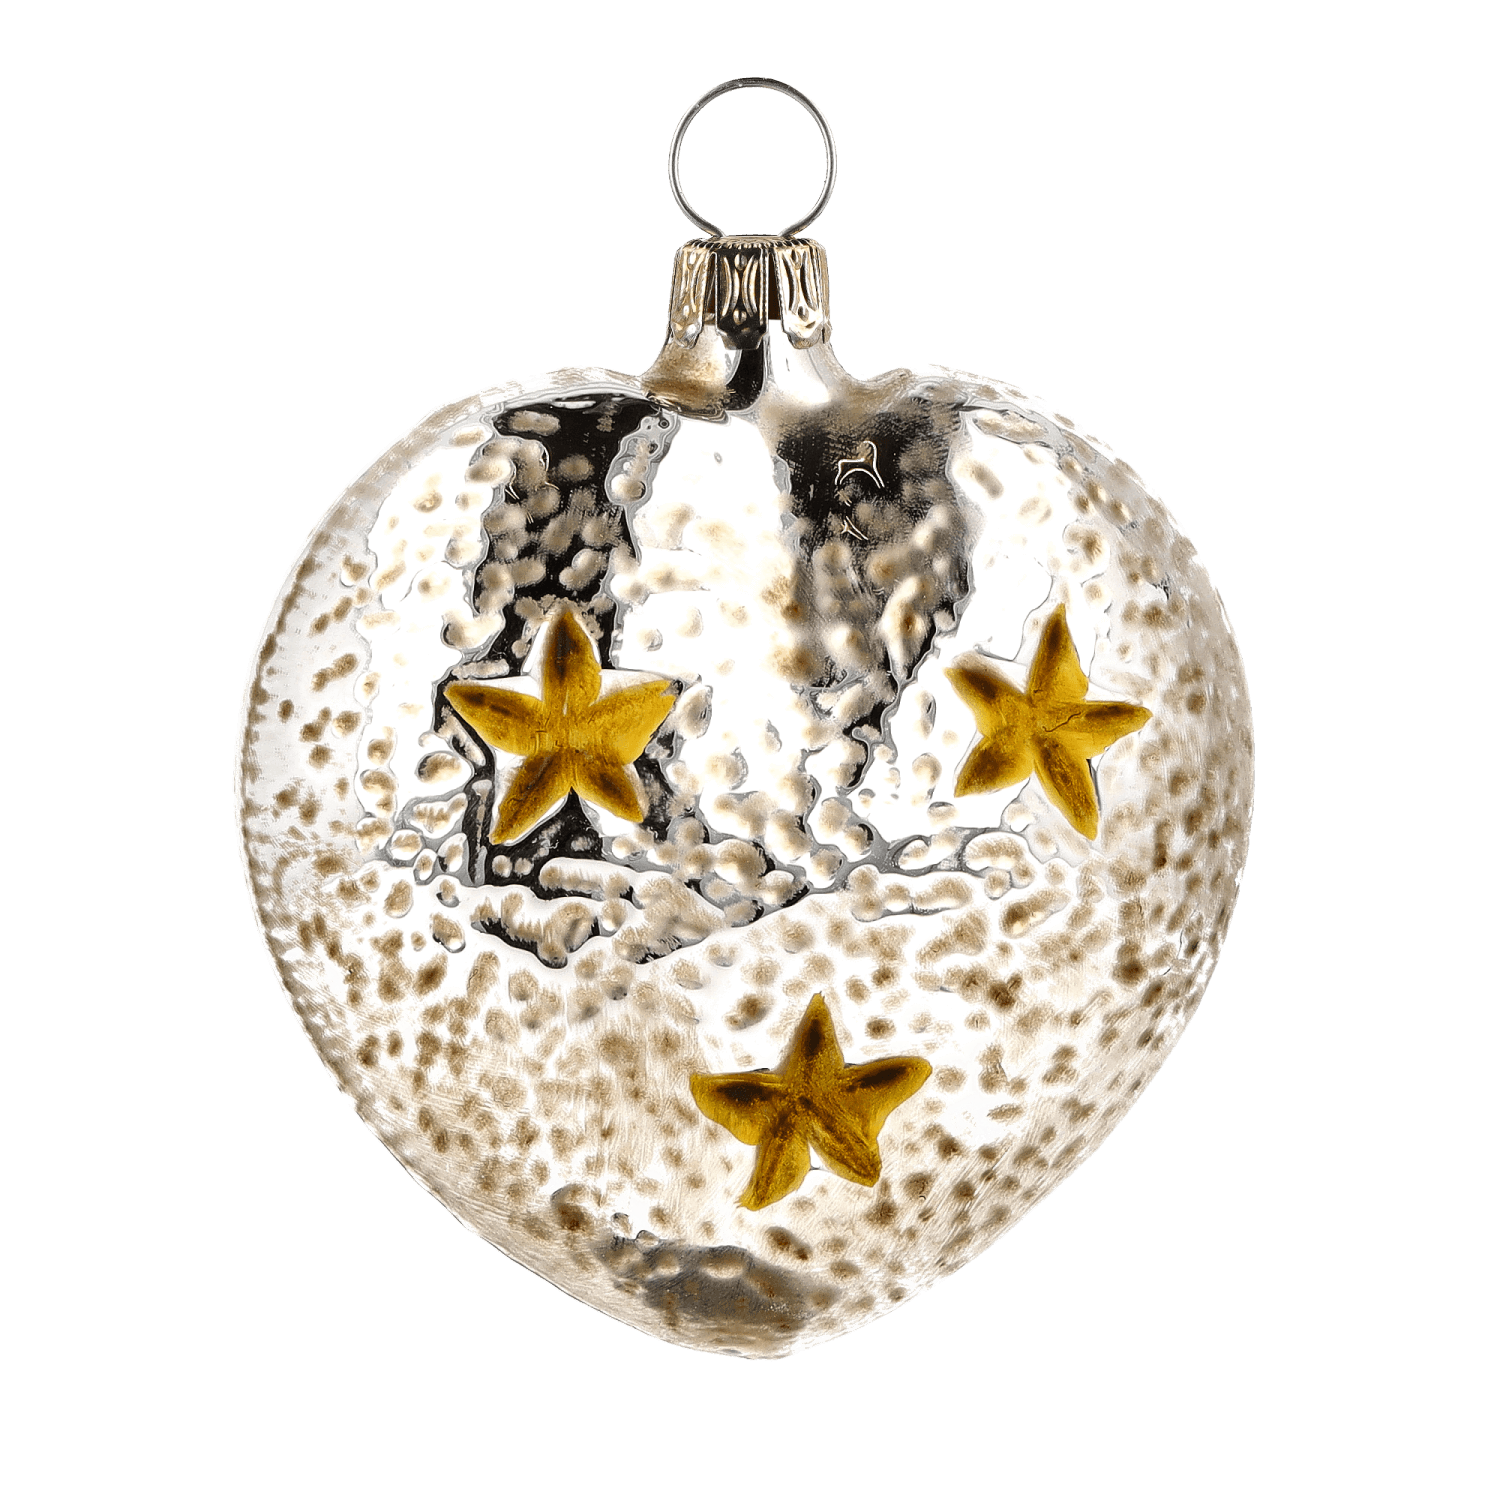 MAROLIN® - Glass ornament "Heart with church and stars red roof"